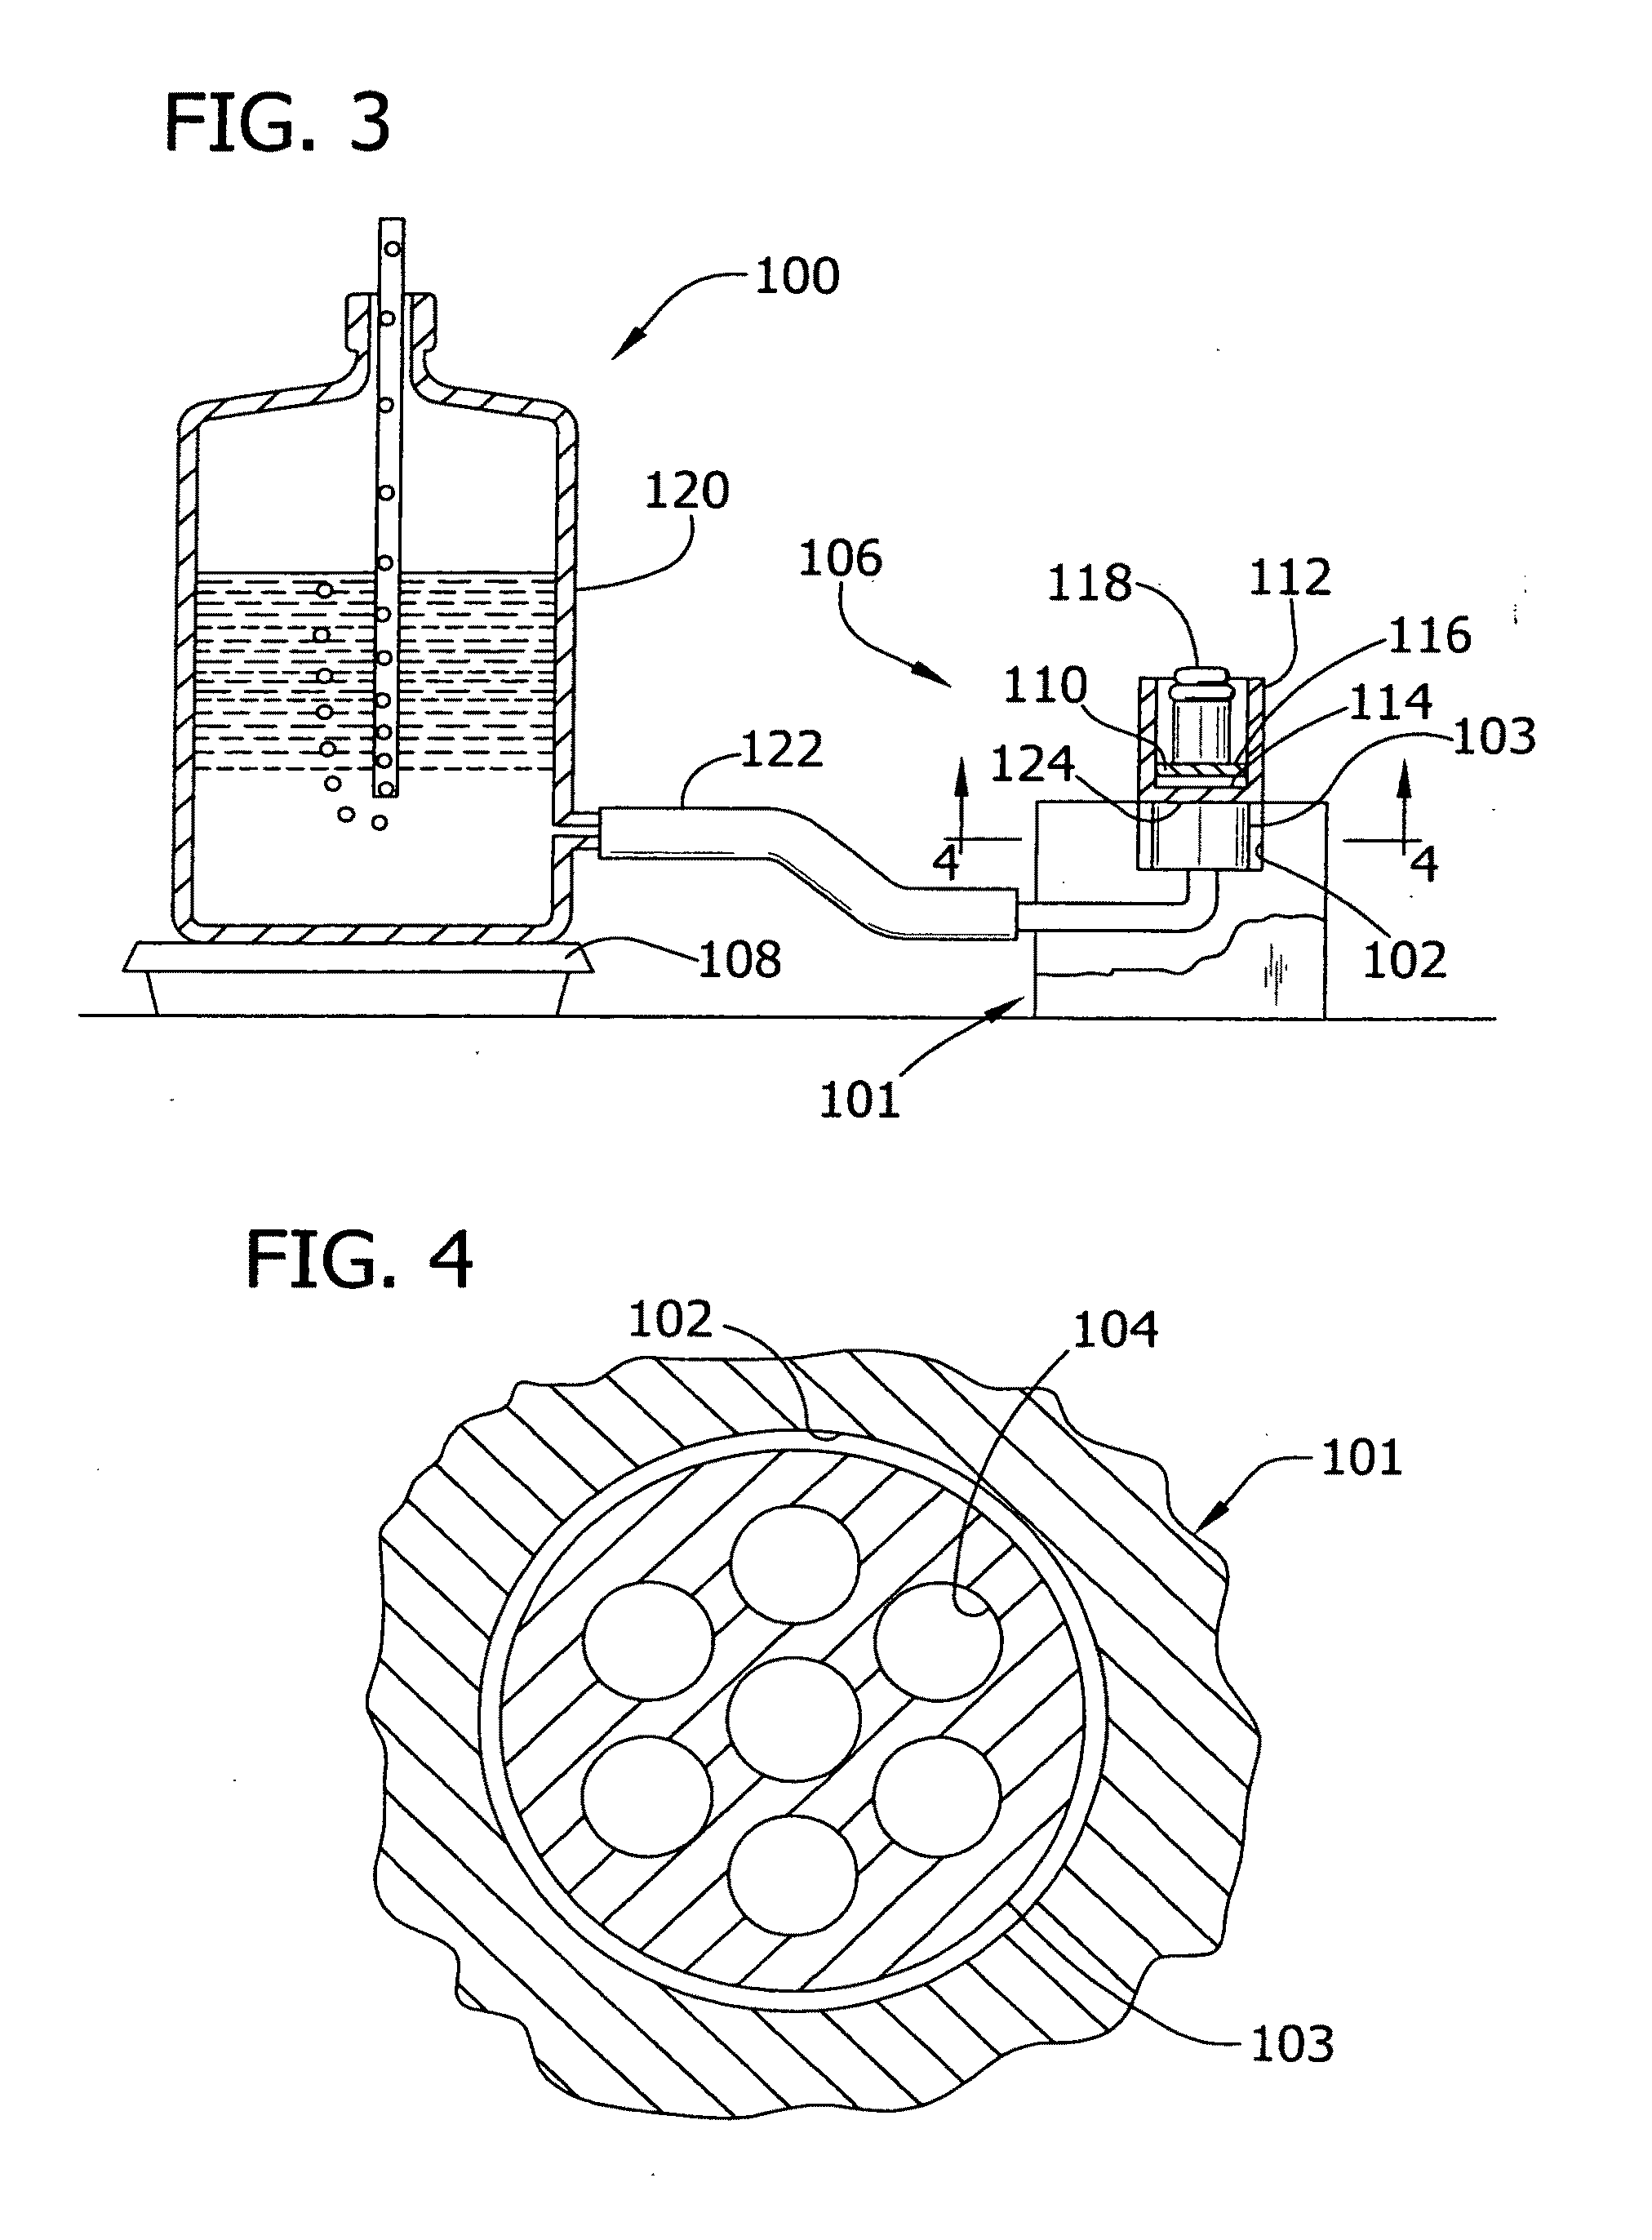 Absorbent structure with superabsorbent material